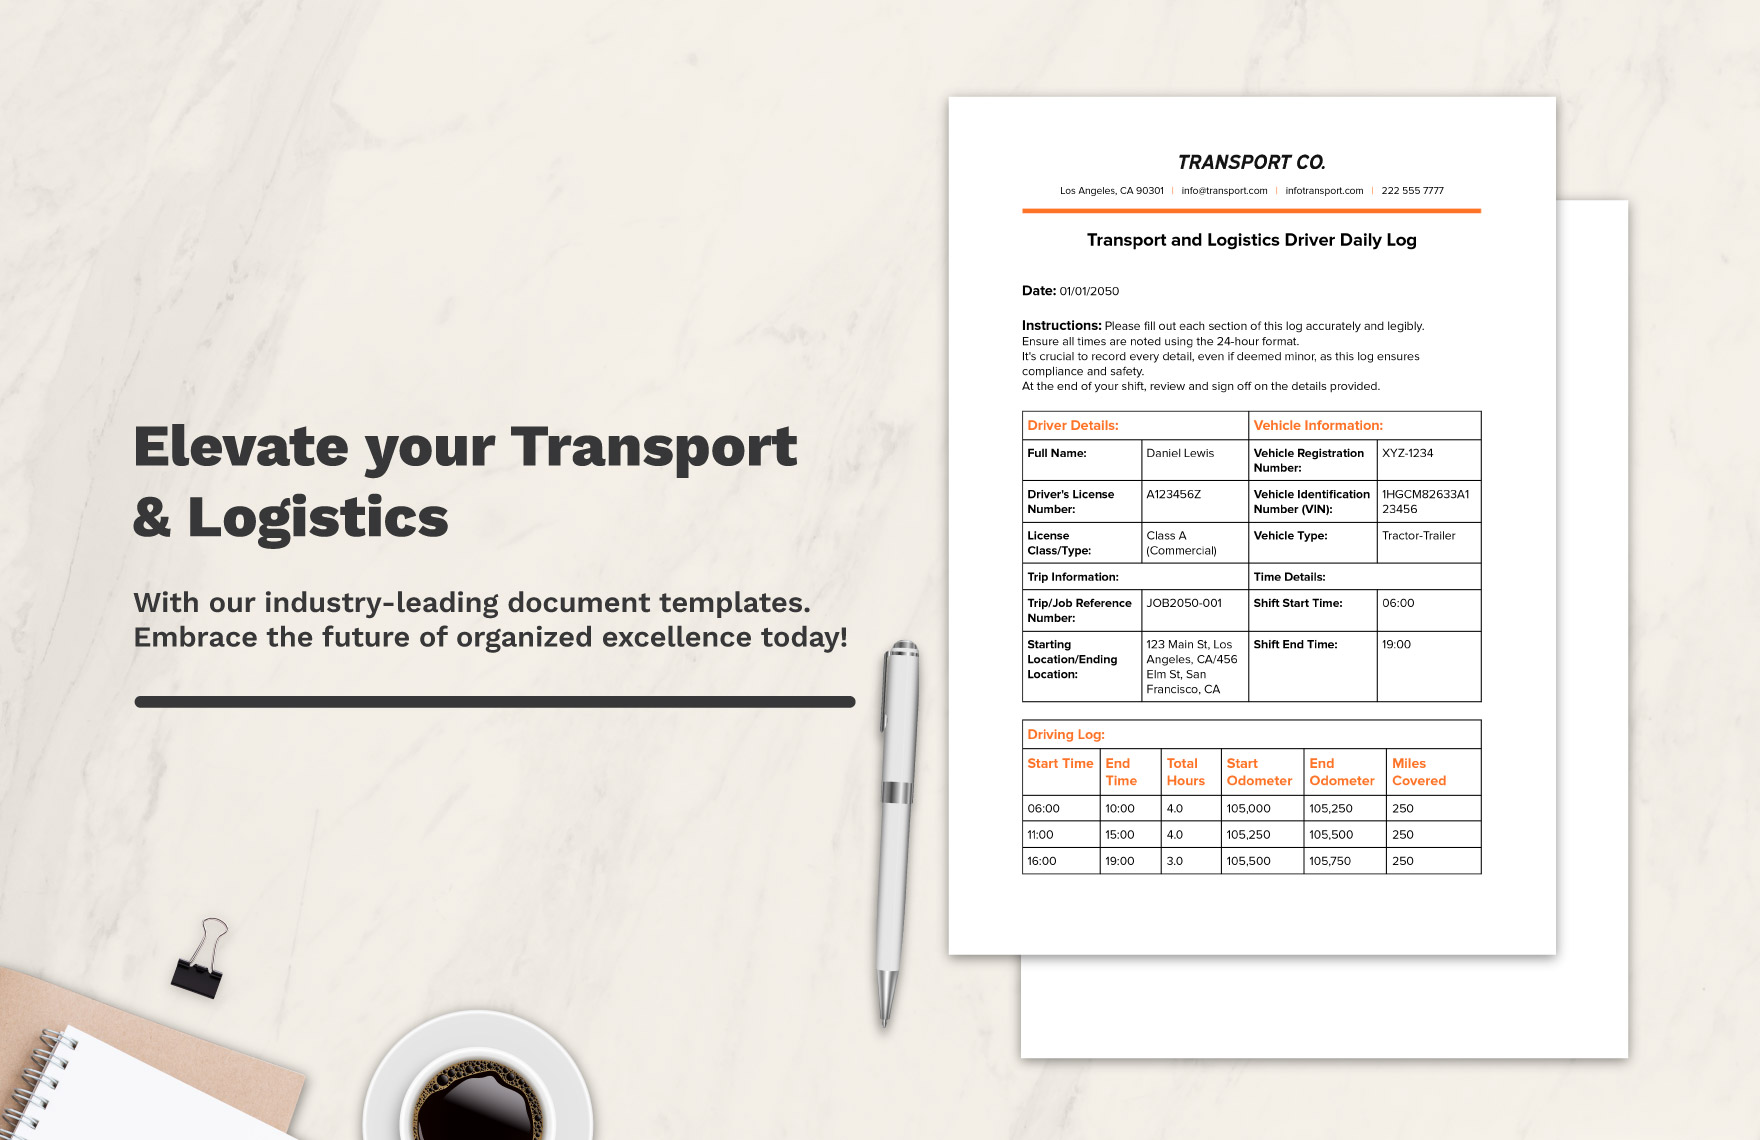 Transport and Logistics Driver Daily Log Template